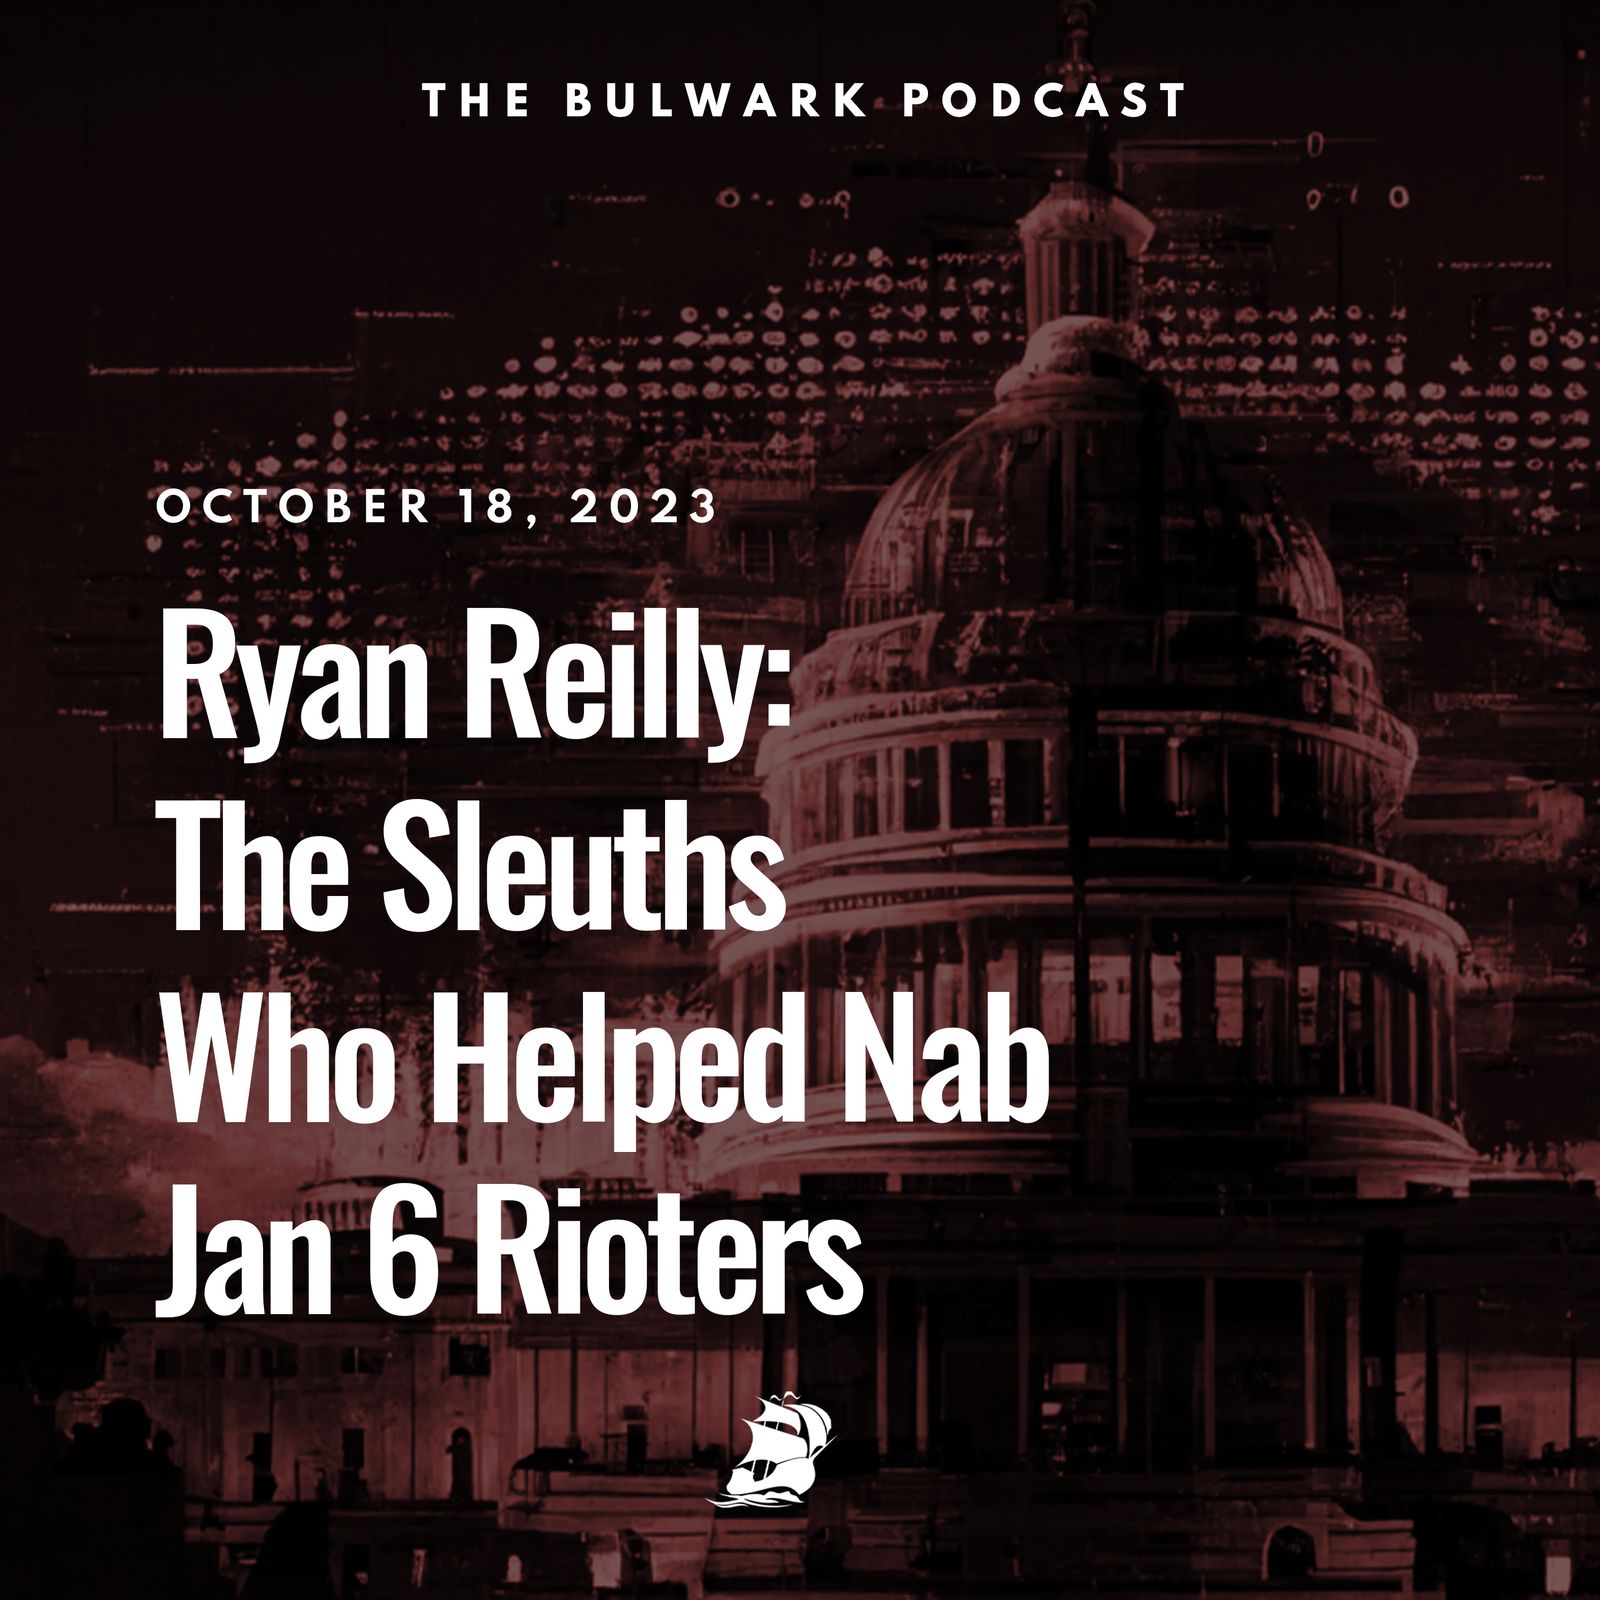 Ryan Reilly: The Sleuths Who Helped Nab Jan 6 Rioters by The Bulwark Podcast